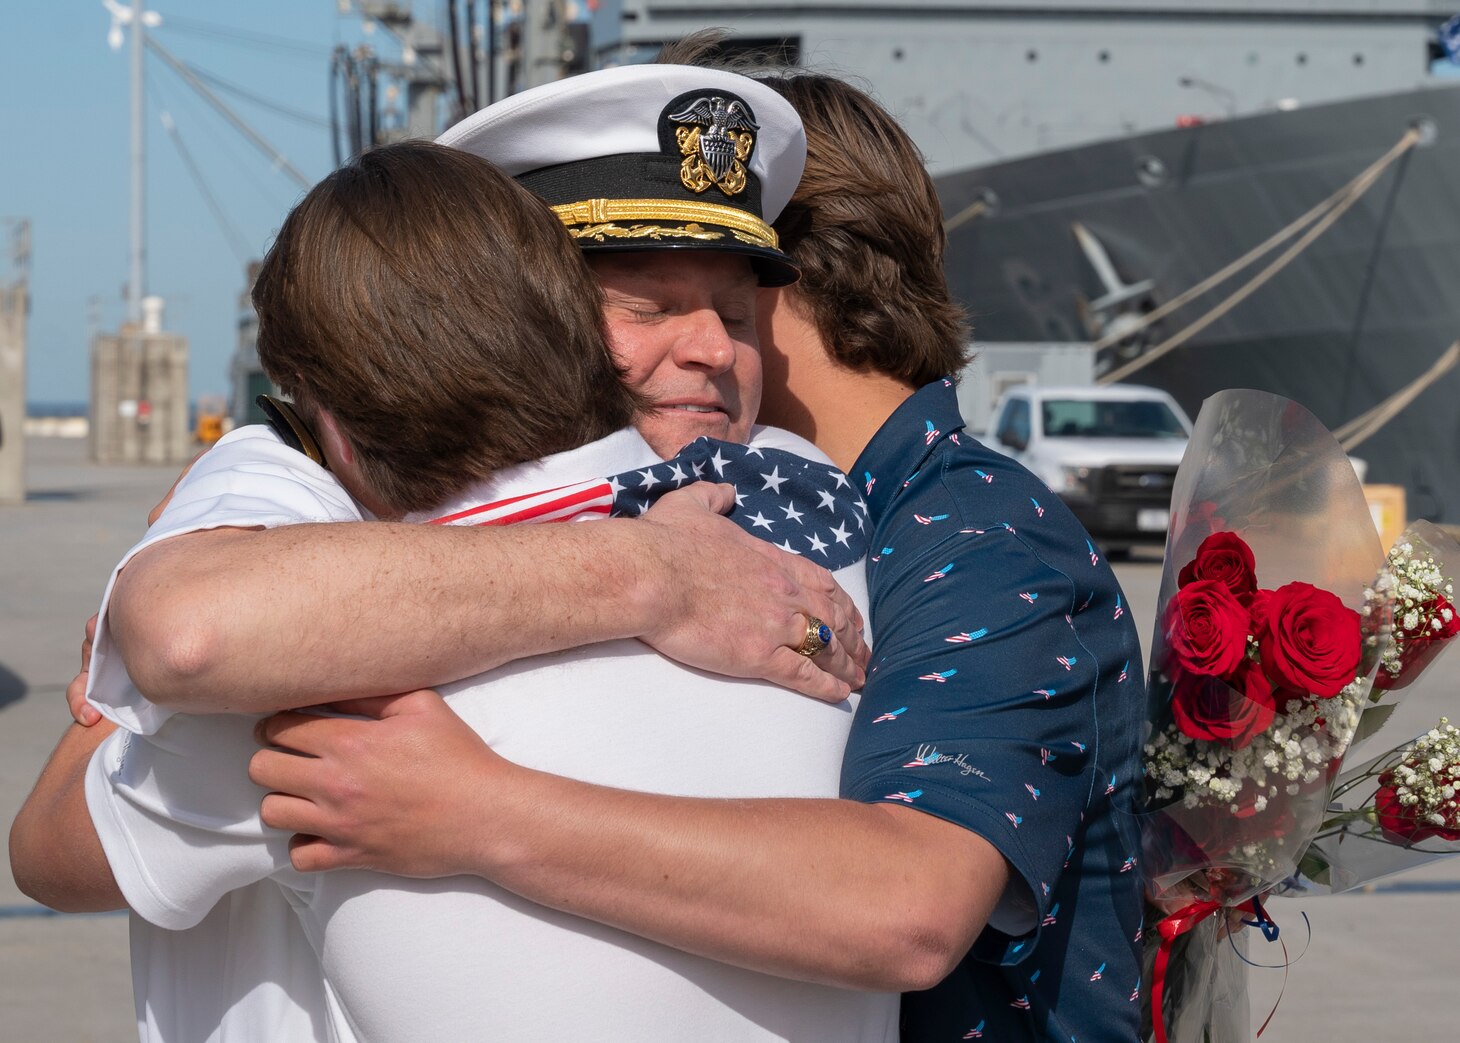 NORFOLK, Va. – Capt. Michael Weeldreyer, commanding officer of the Ticonderoga-class guided-missile cruiser USS Leyte Gulf (CG 55), reunites with his sons on the pier at Naval Station Norfolk following an eight-month deployment with Carrier Strike Group (CSG) 10, April 23, 2023. The George H.W. Bush CSG was deployed to the U.S. Naval Forces Europe area of operations, employed by U.S. Sixth Fleet to defend U.S., allied and partner interests. (U.S. Navy photo by Mass Communication Specialist 1st Class Kris R. Lindstrom)